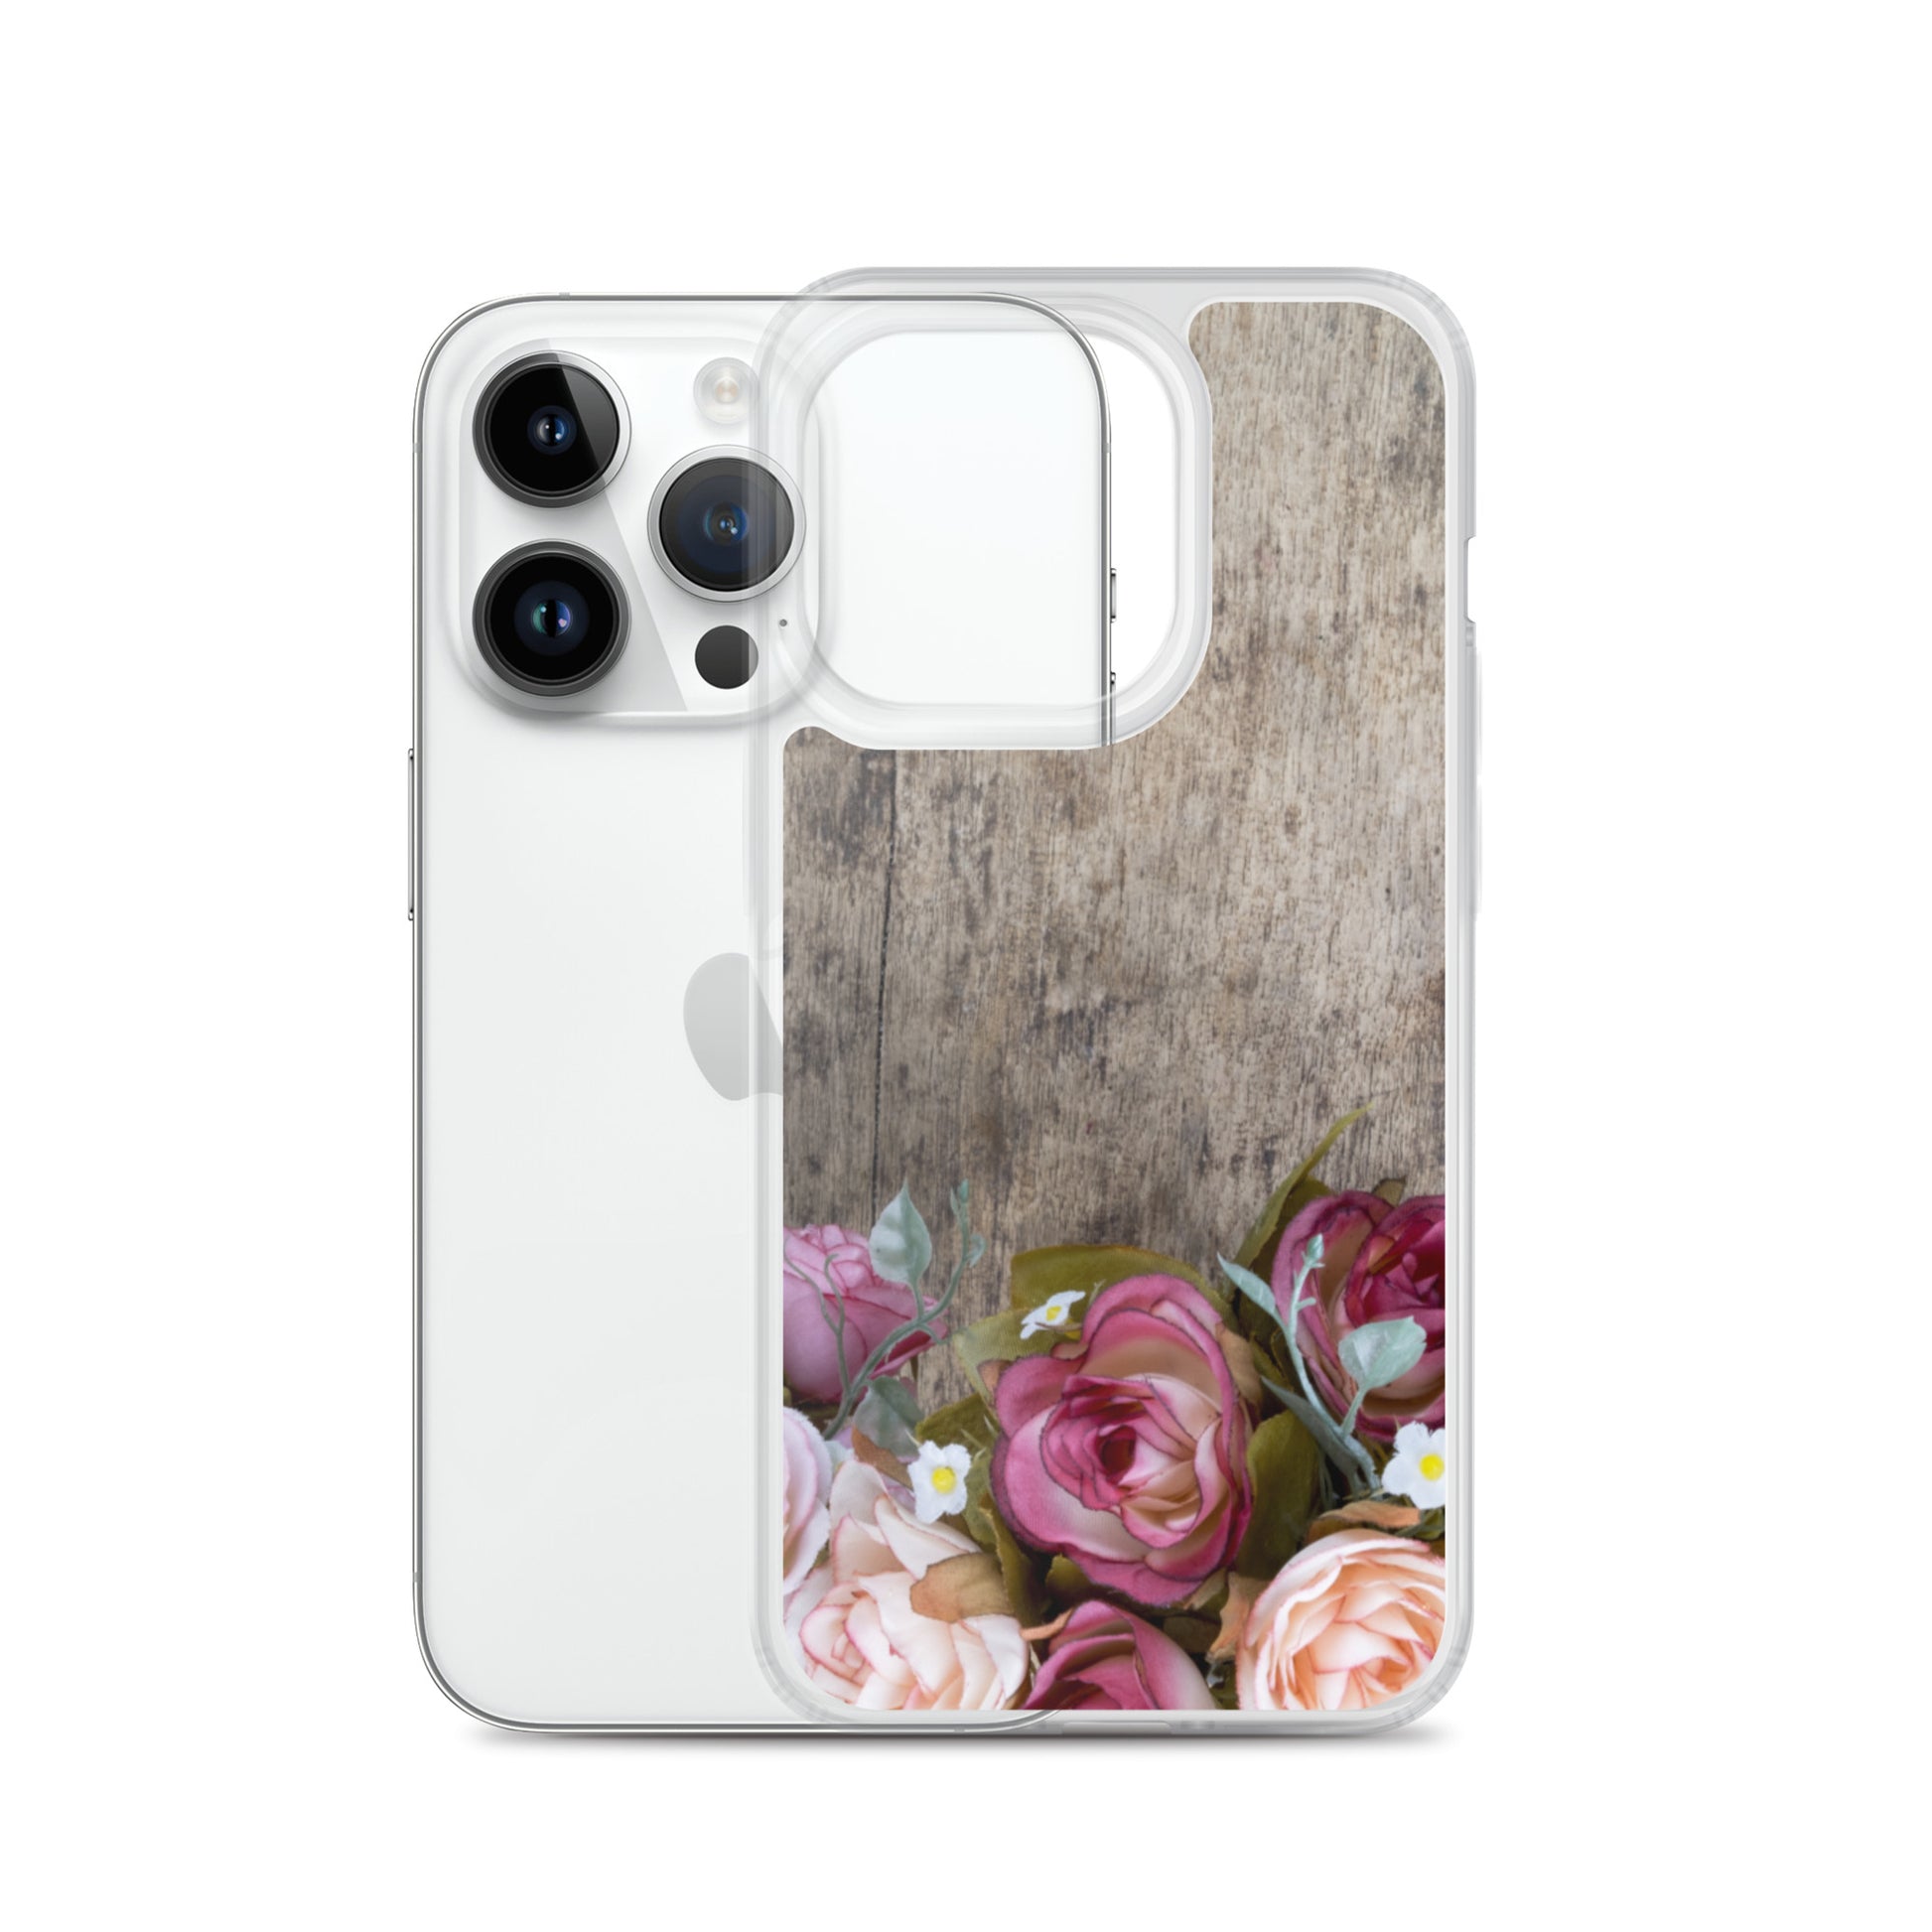 Roses on Wood iPhone 14 13 12 Pro Max Case, Cute Wooden Pink Flowers Print Gift Aesthetic iPhone 11 Mini SE XS XR X 7 Plus 8 Cell Phone Starcove Fashion